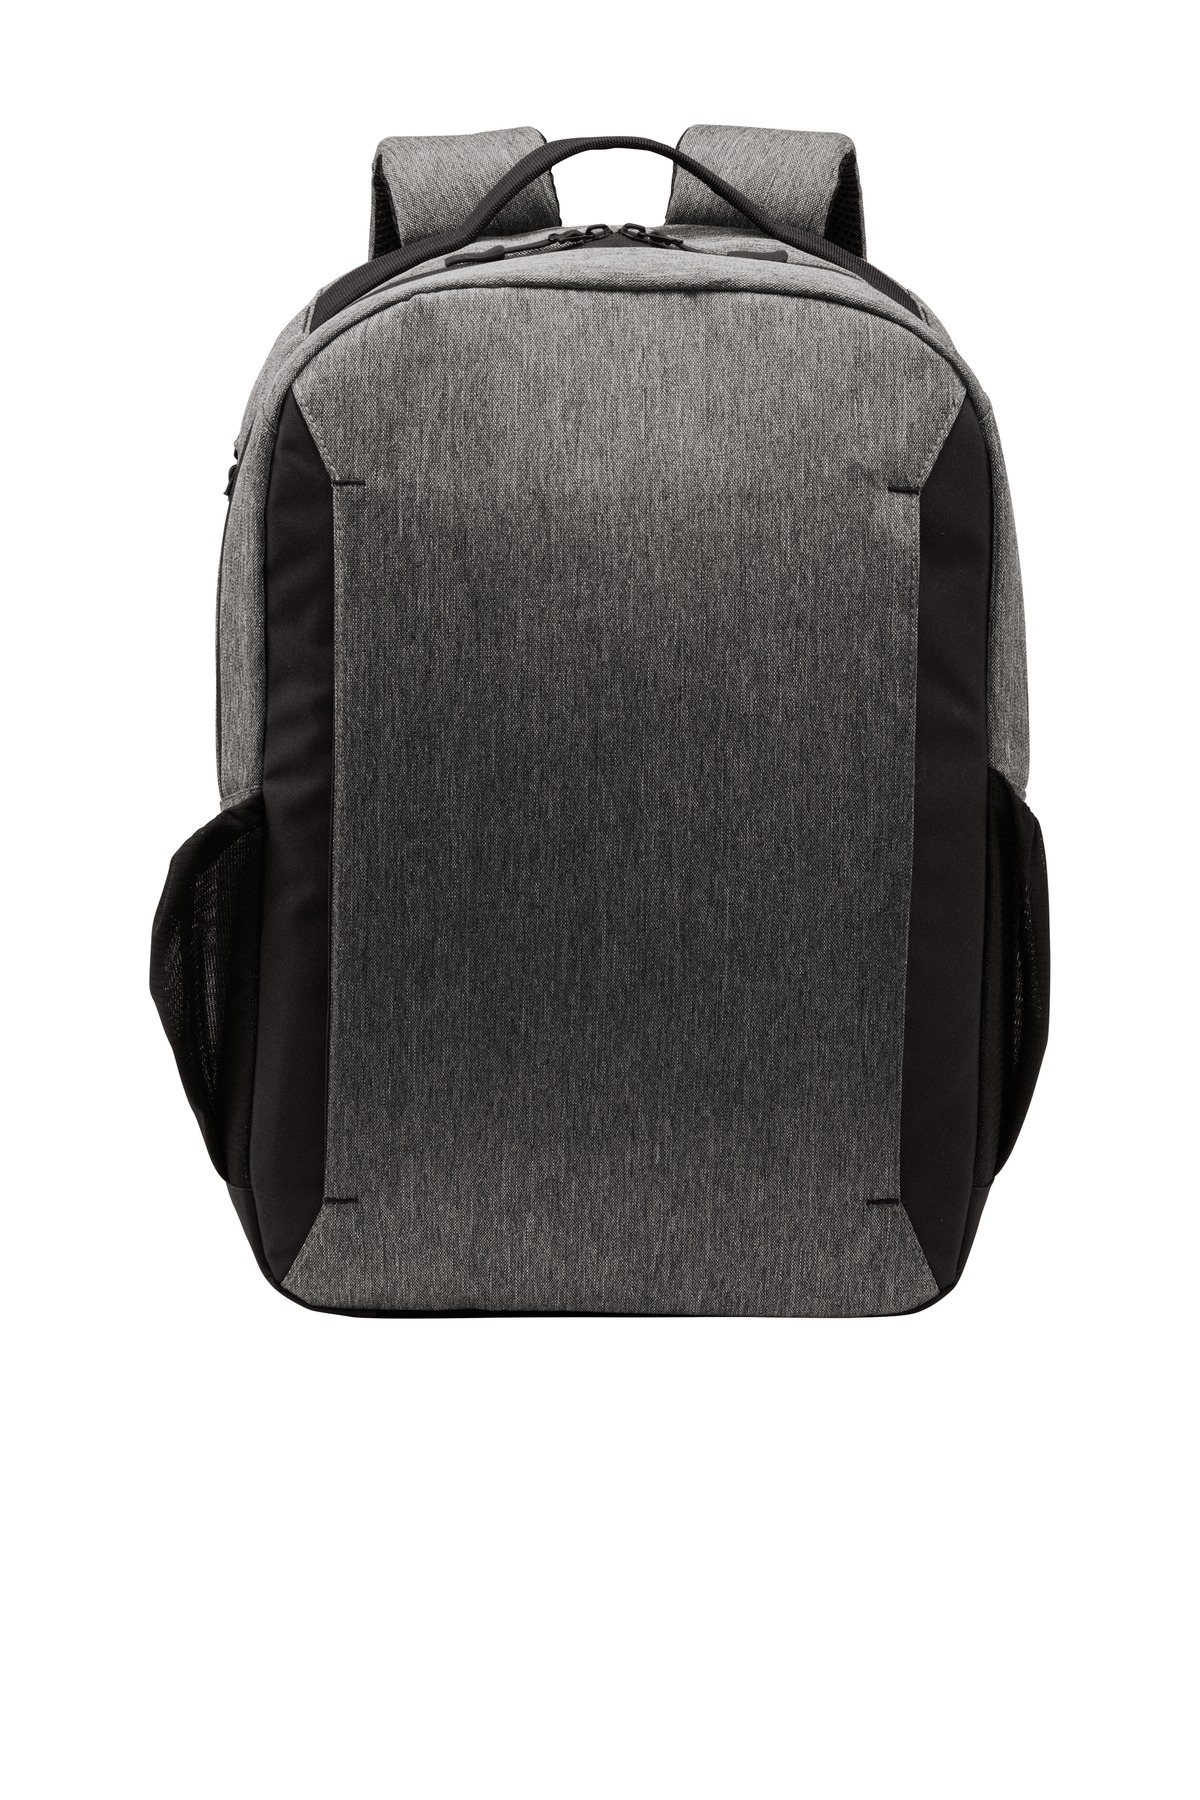 Port Authority Hospitality Bags ® Vector Backpack.-Port Authority